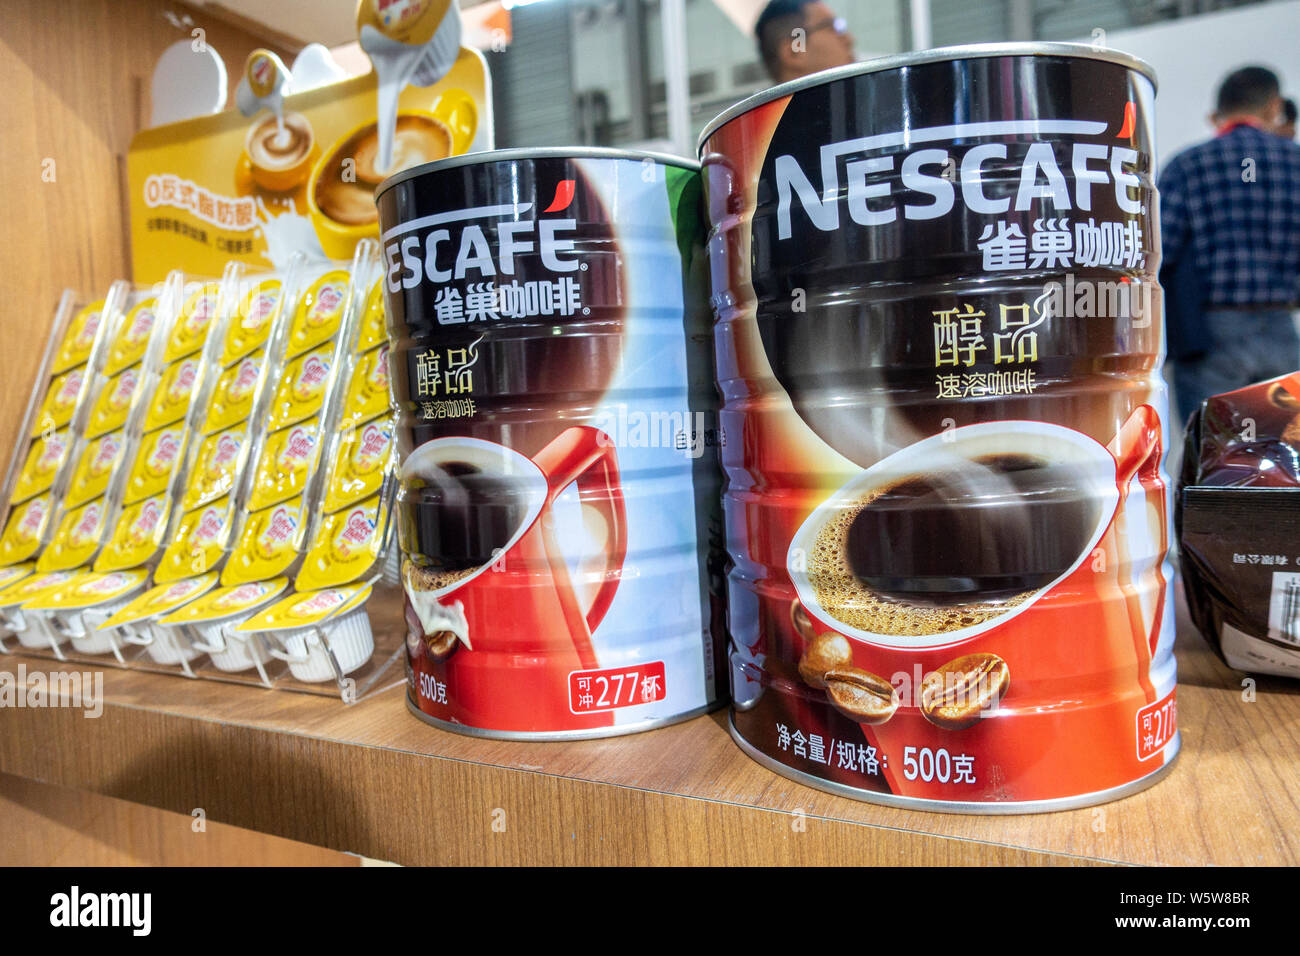 --FILE--Tins of Nescafe coffee of Nestle are displayed during an expo in Shanghai, China, 13 November 2018.   Global food giant Nestle's coffee center Stock Photo